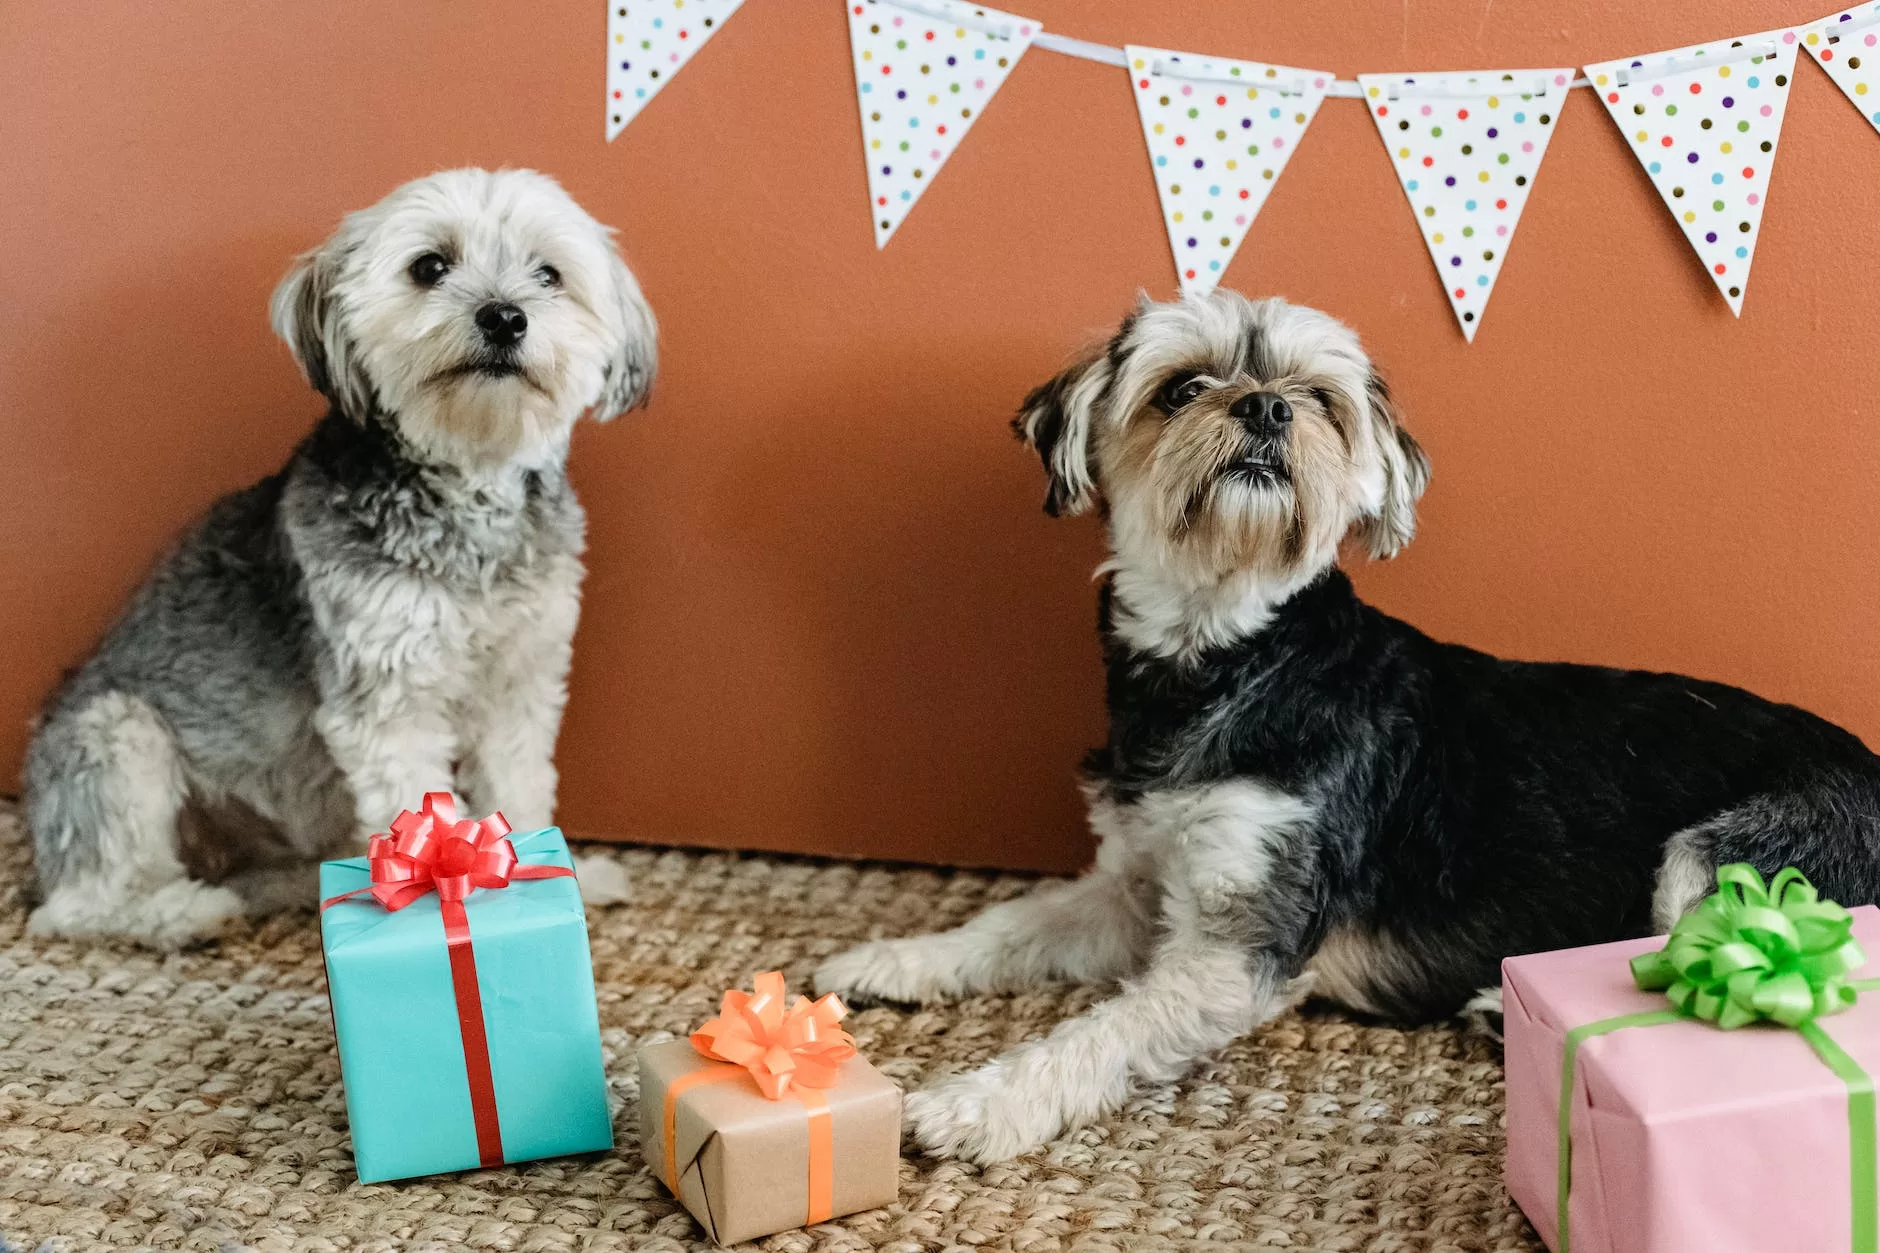 calm dogs resting in cozy apartment with festive decorations